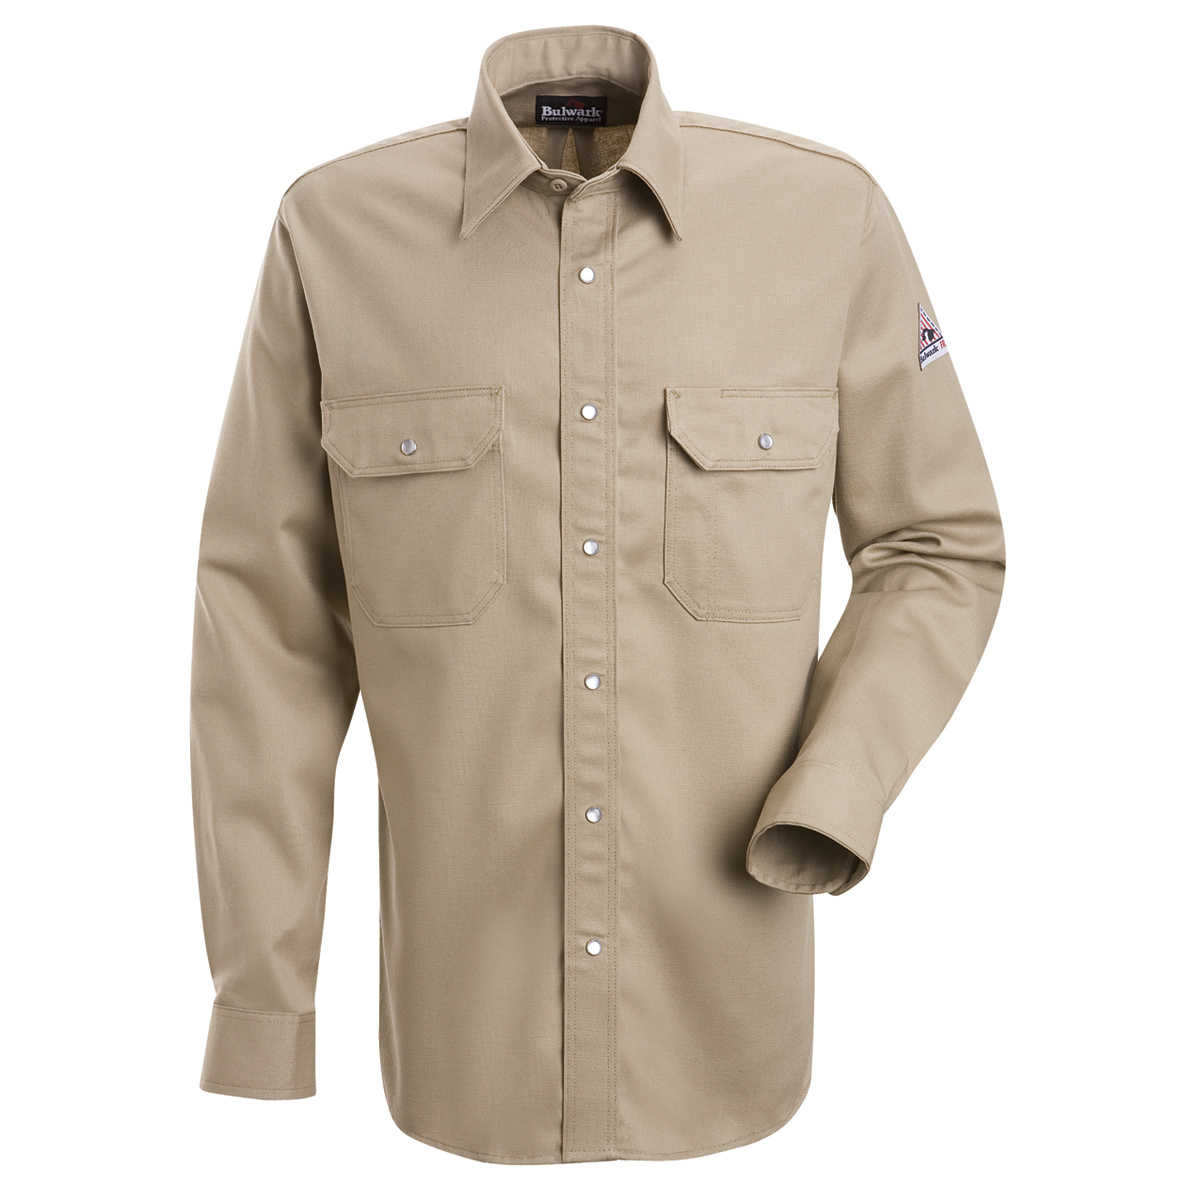 Bulwark® X-Large X-Tall Tan EXCEL FR® Cotton Flame Resistant Uniform Shirt With Snap Front Closure